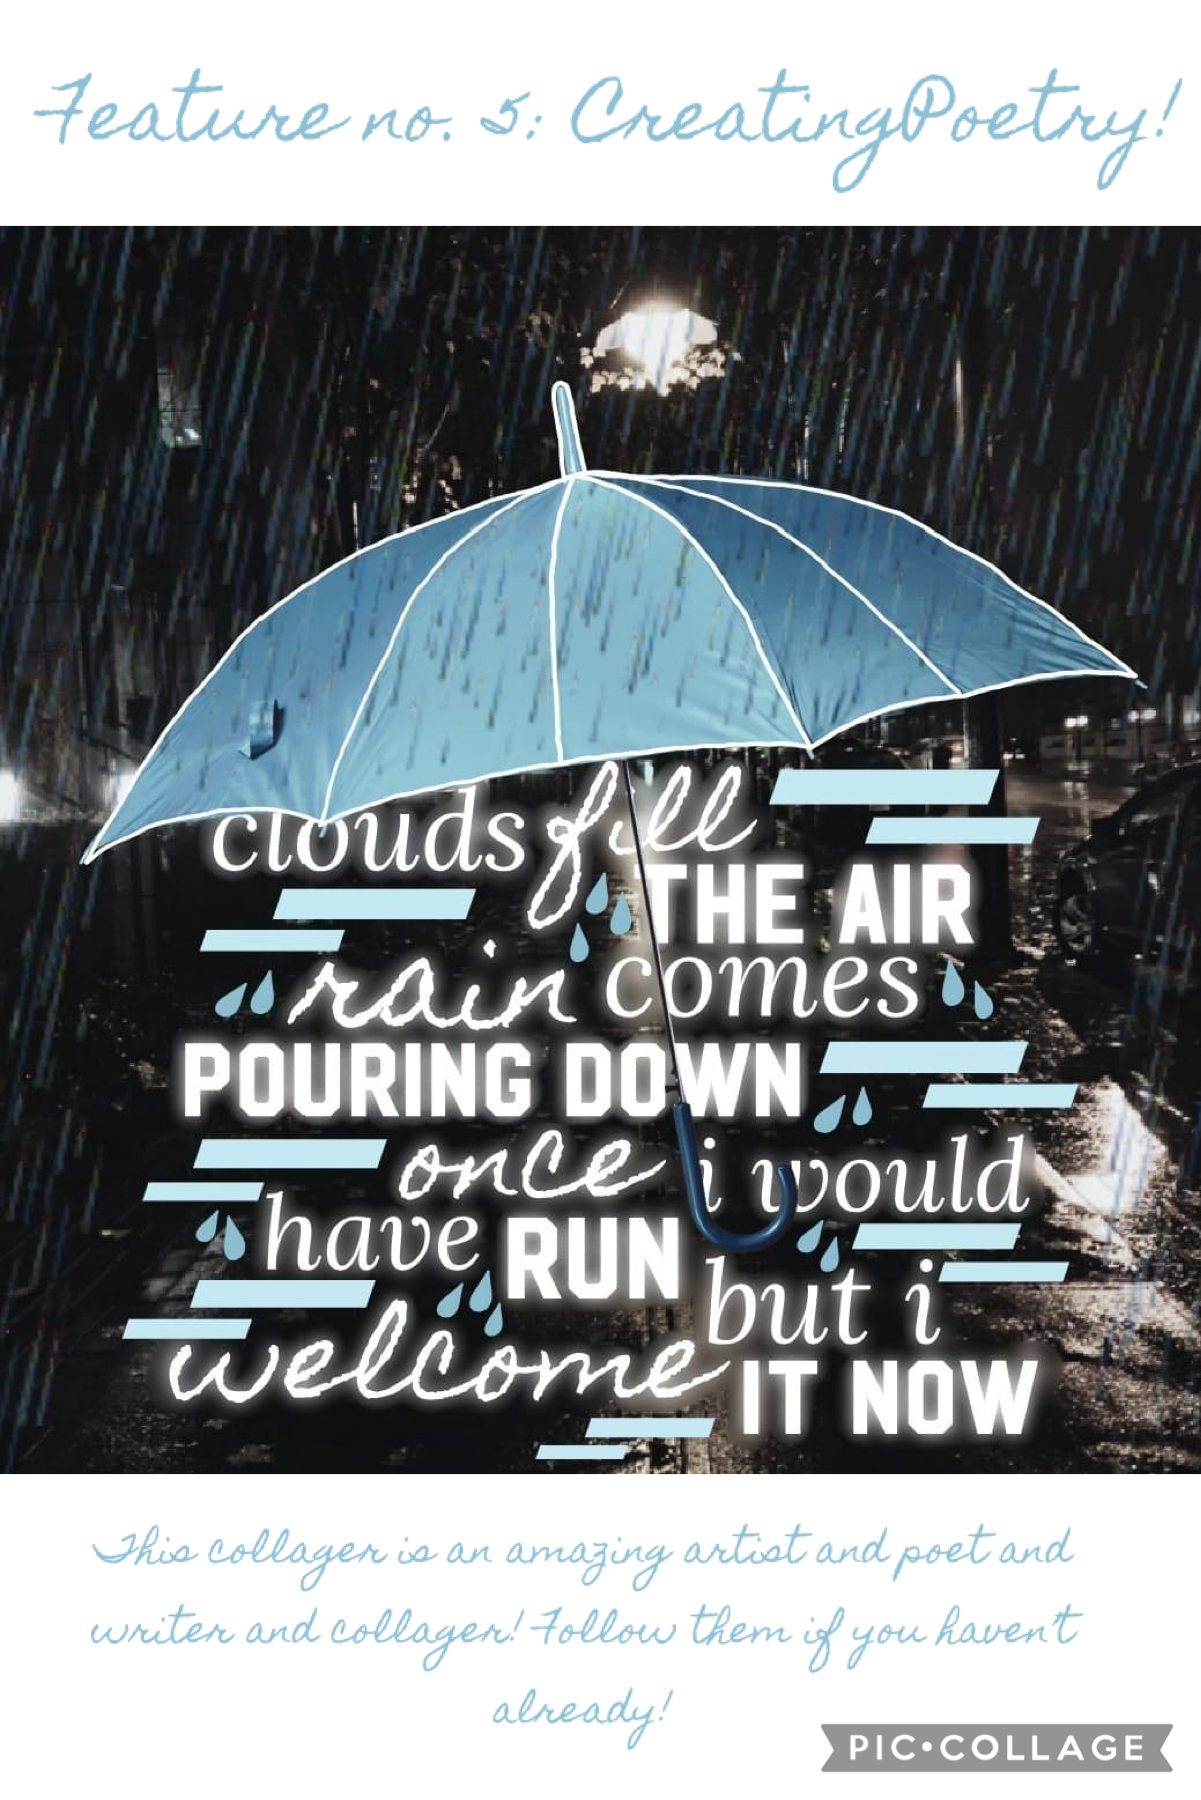 ☔️ TAP ☔️ 

I mean, just look at this collage! The umbrella is outlined neatly in white and there are even little raindrops throughout the quote! Wut?! AMAZING! 🤩 